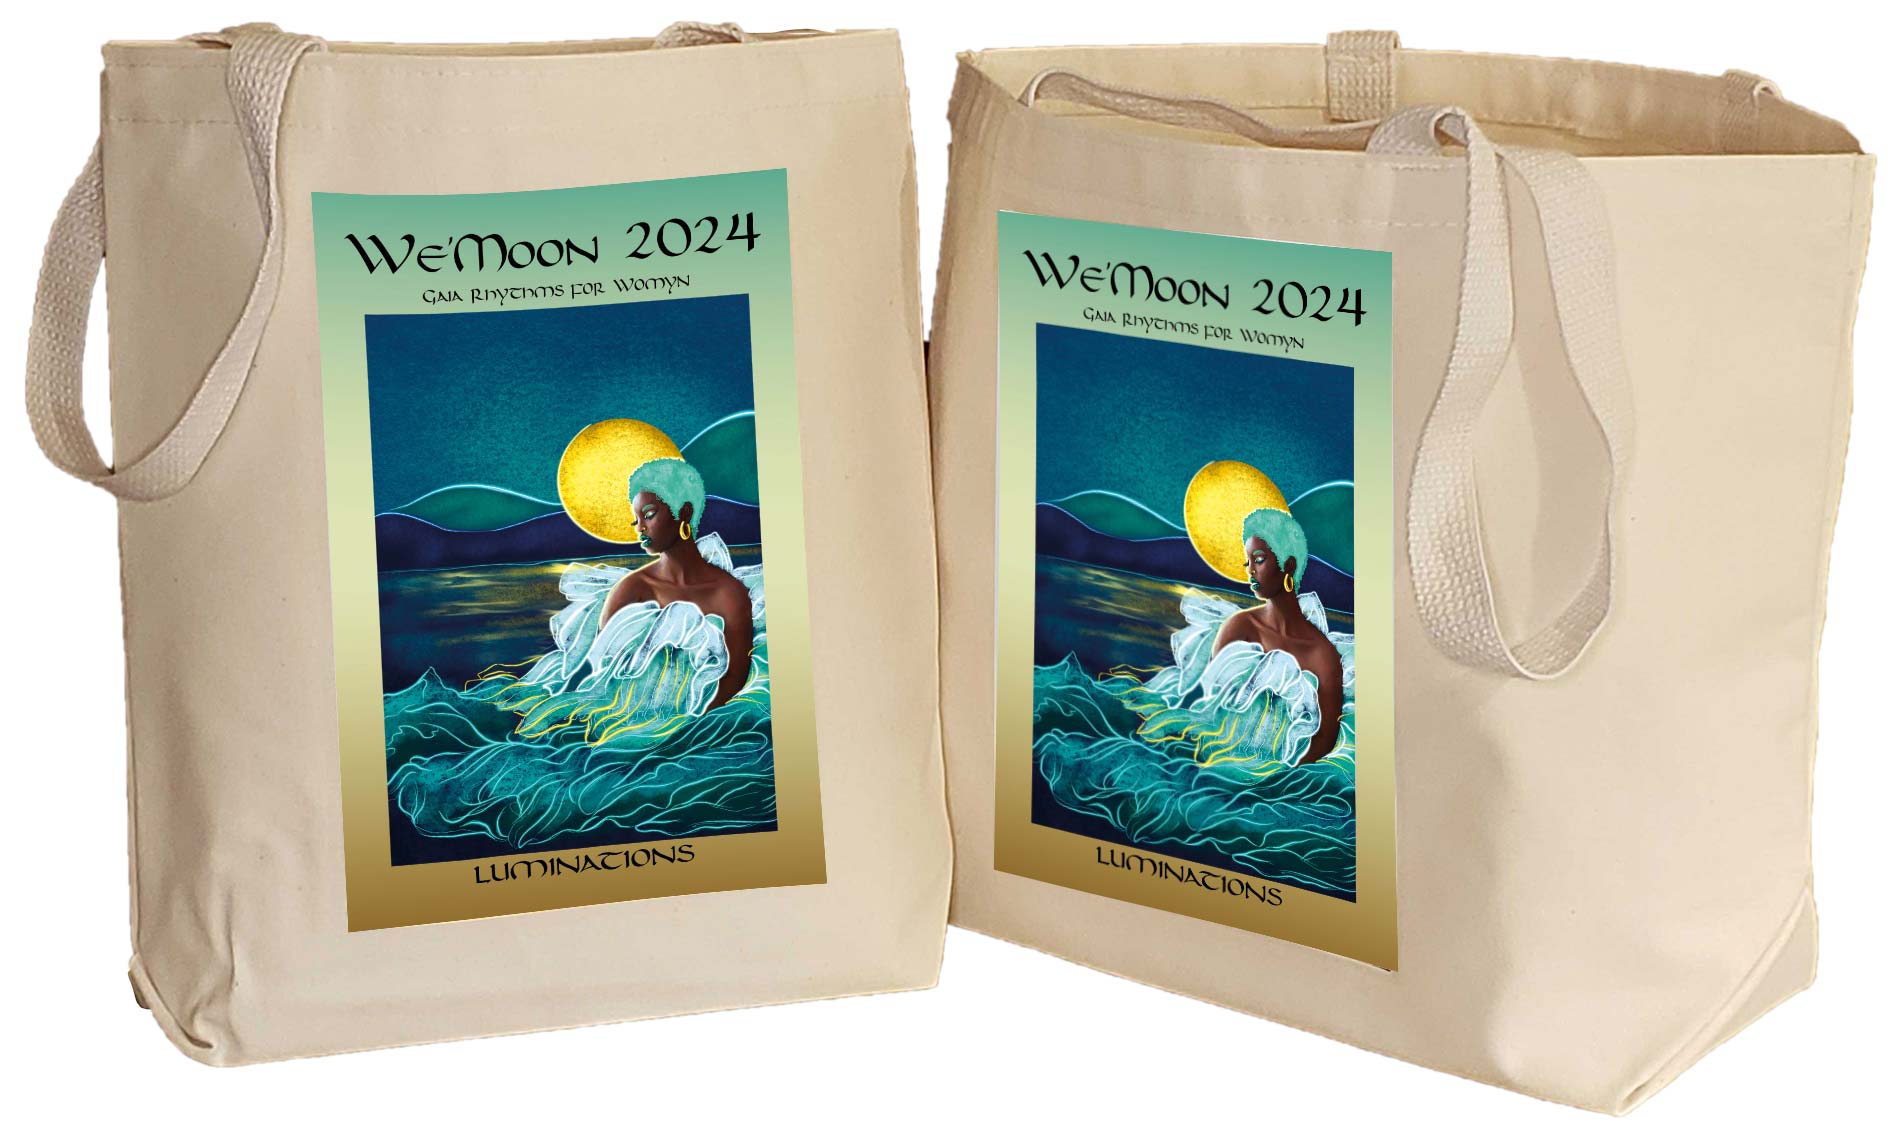 small and large cotton grocery totebags with art